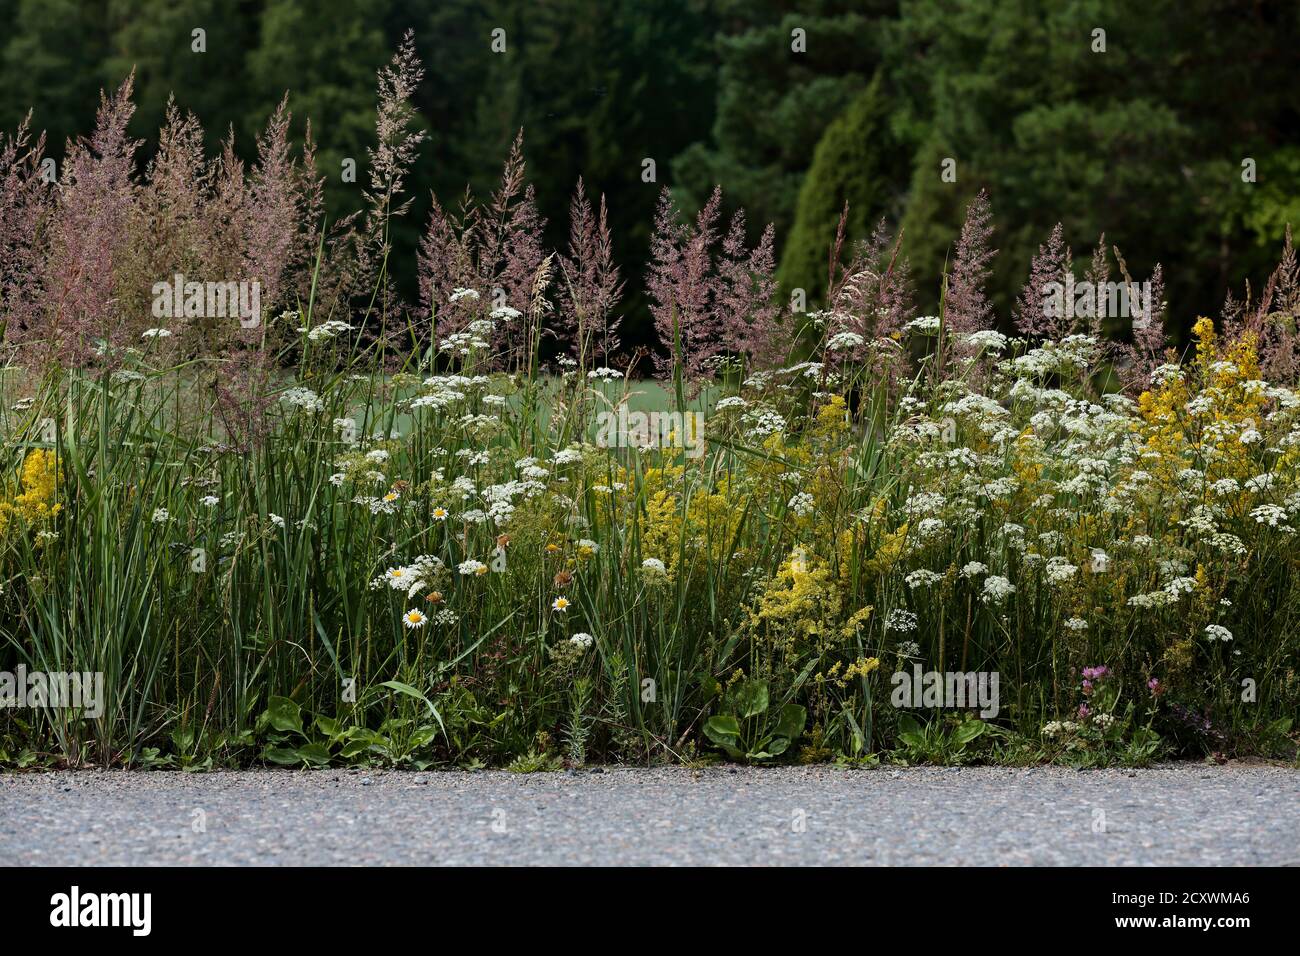 Hays and flowers growing along a road shoulder Stock Photo